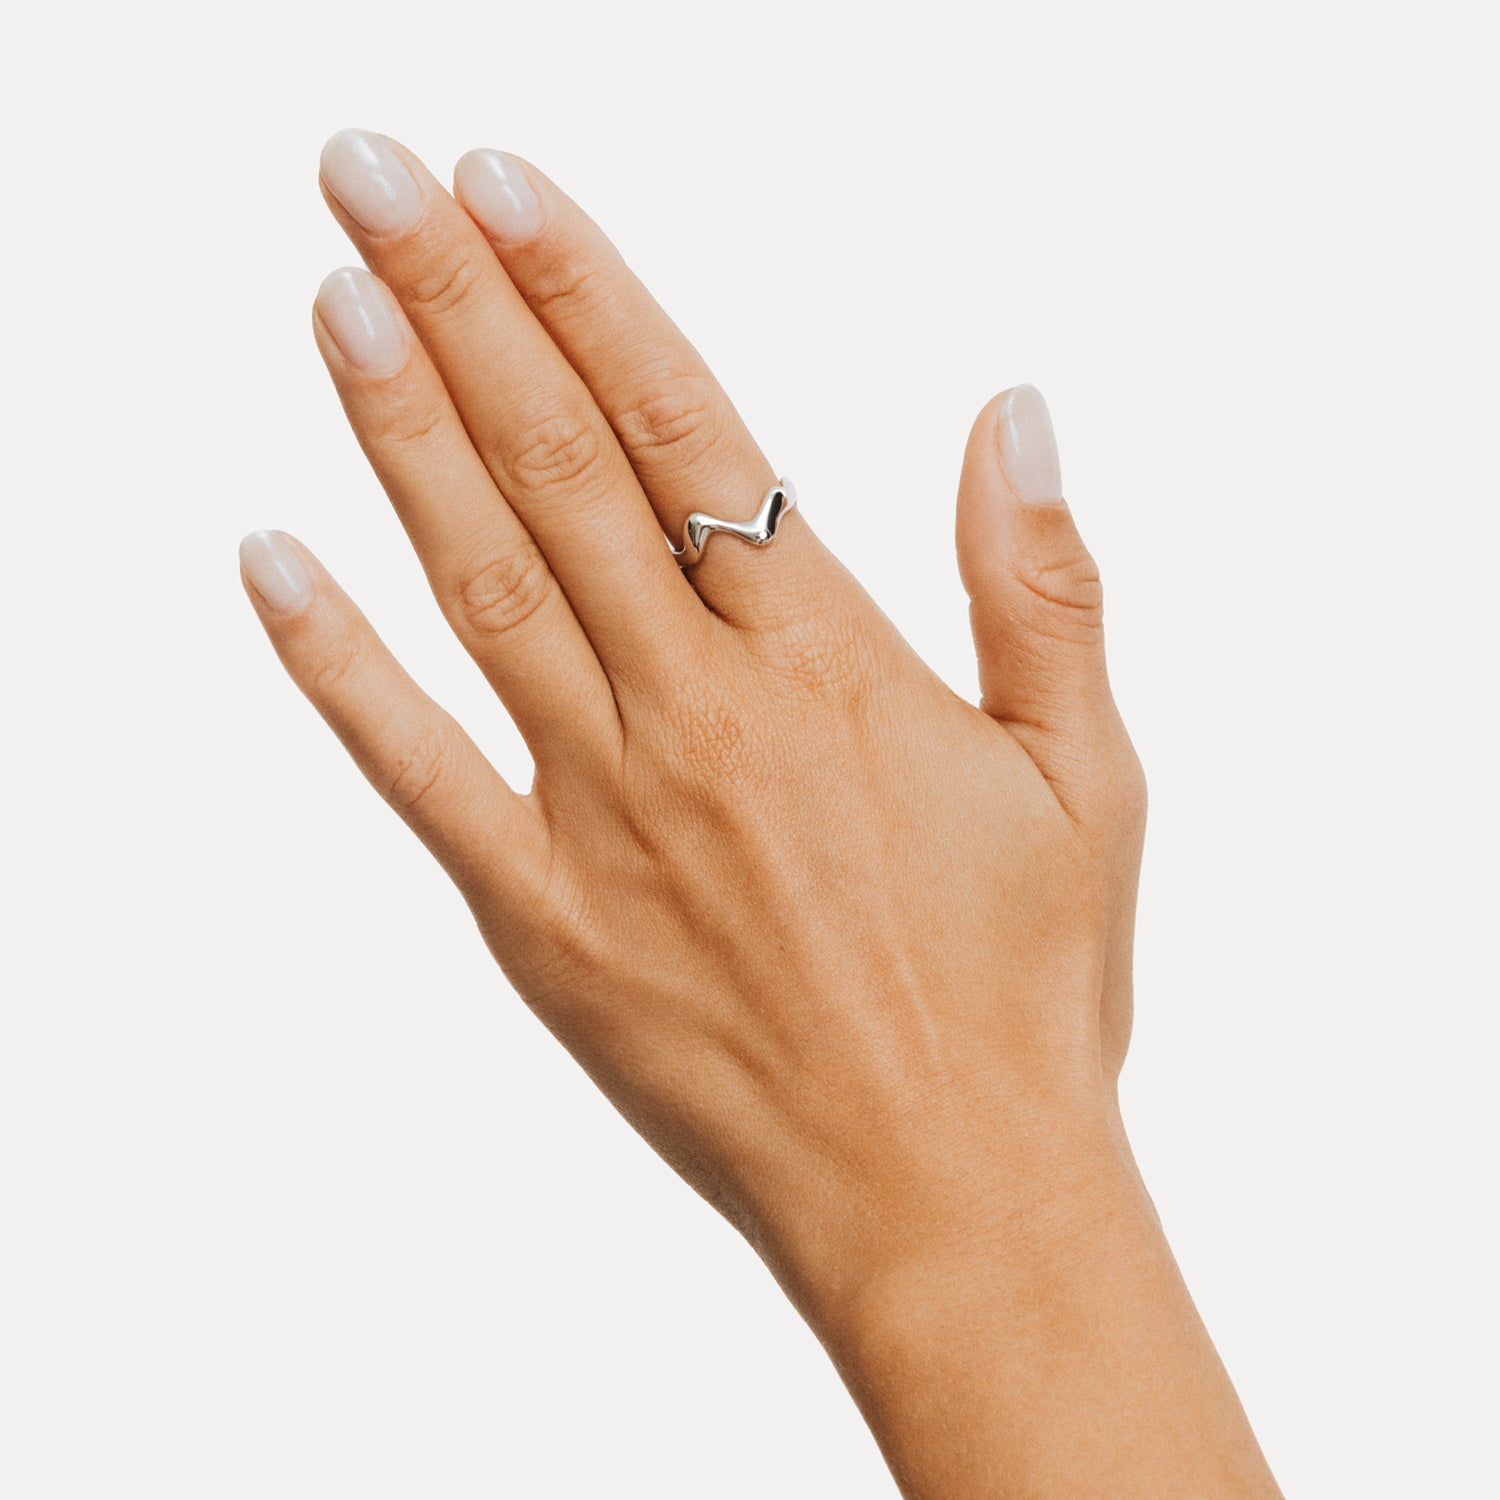 Poise Wave Ring, recycled Sterling Silver, shown on hand - VEYIA Berlin